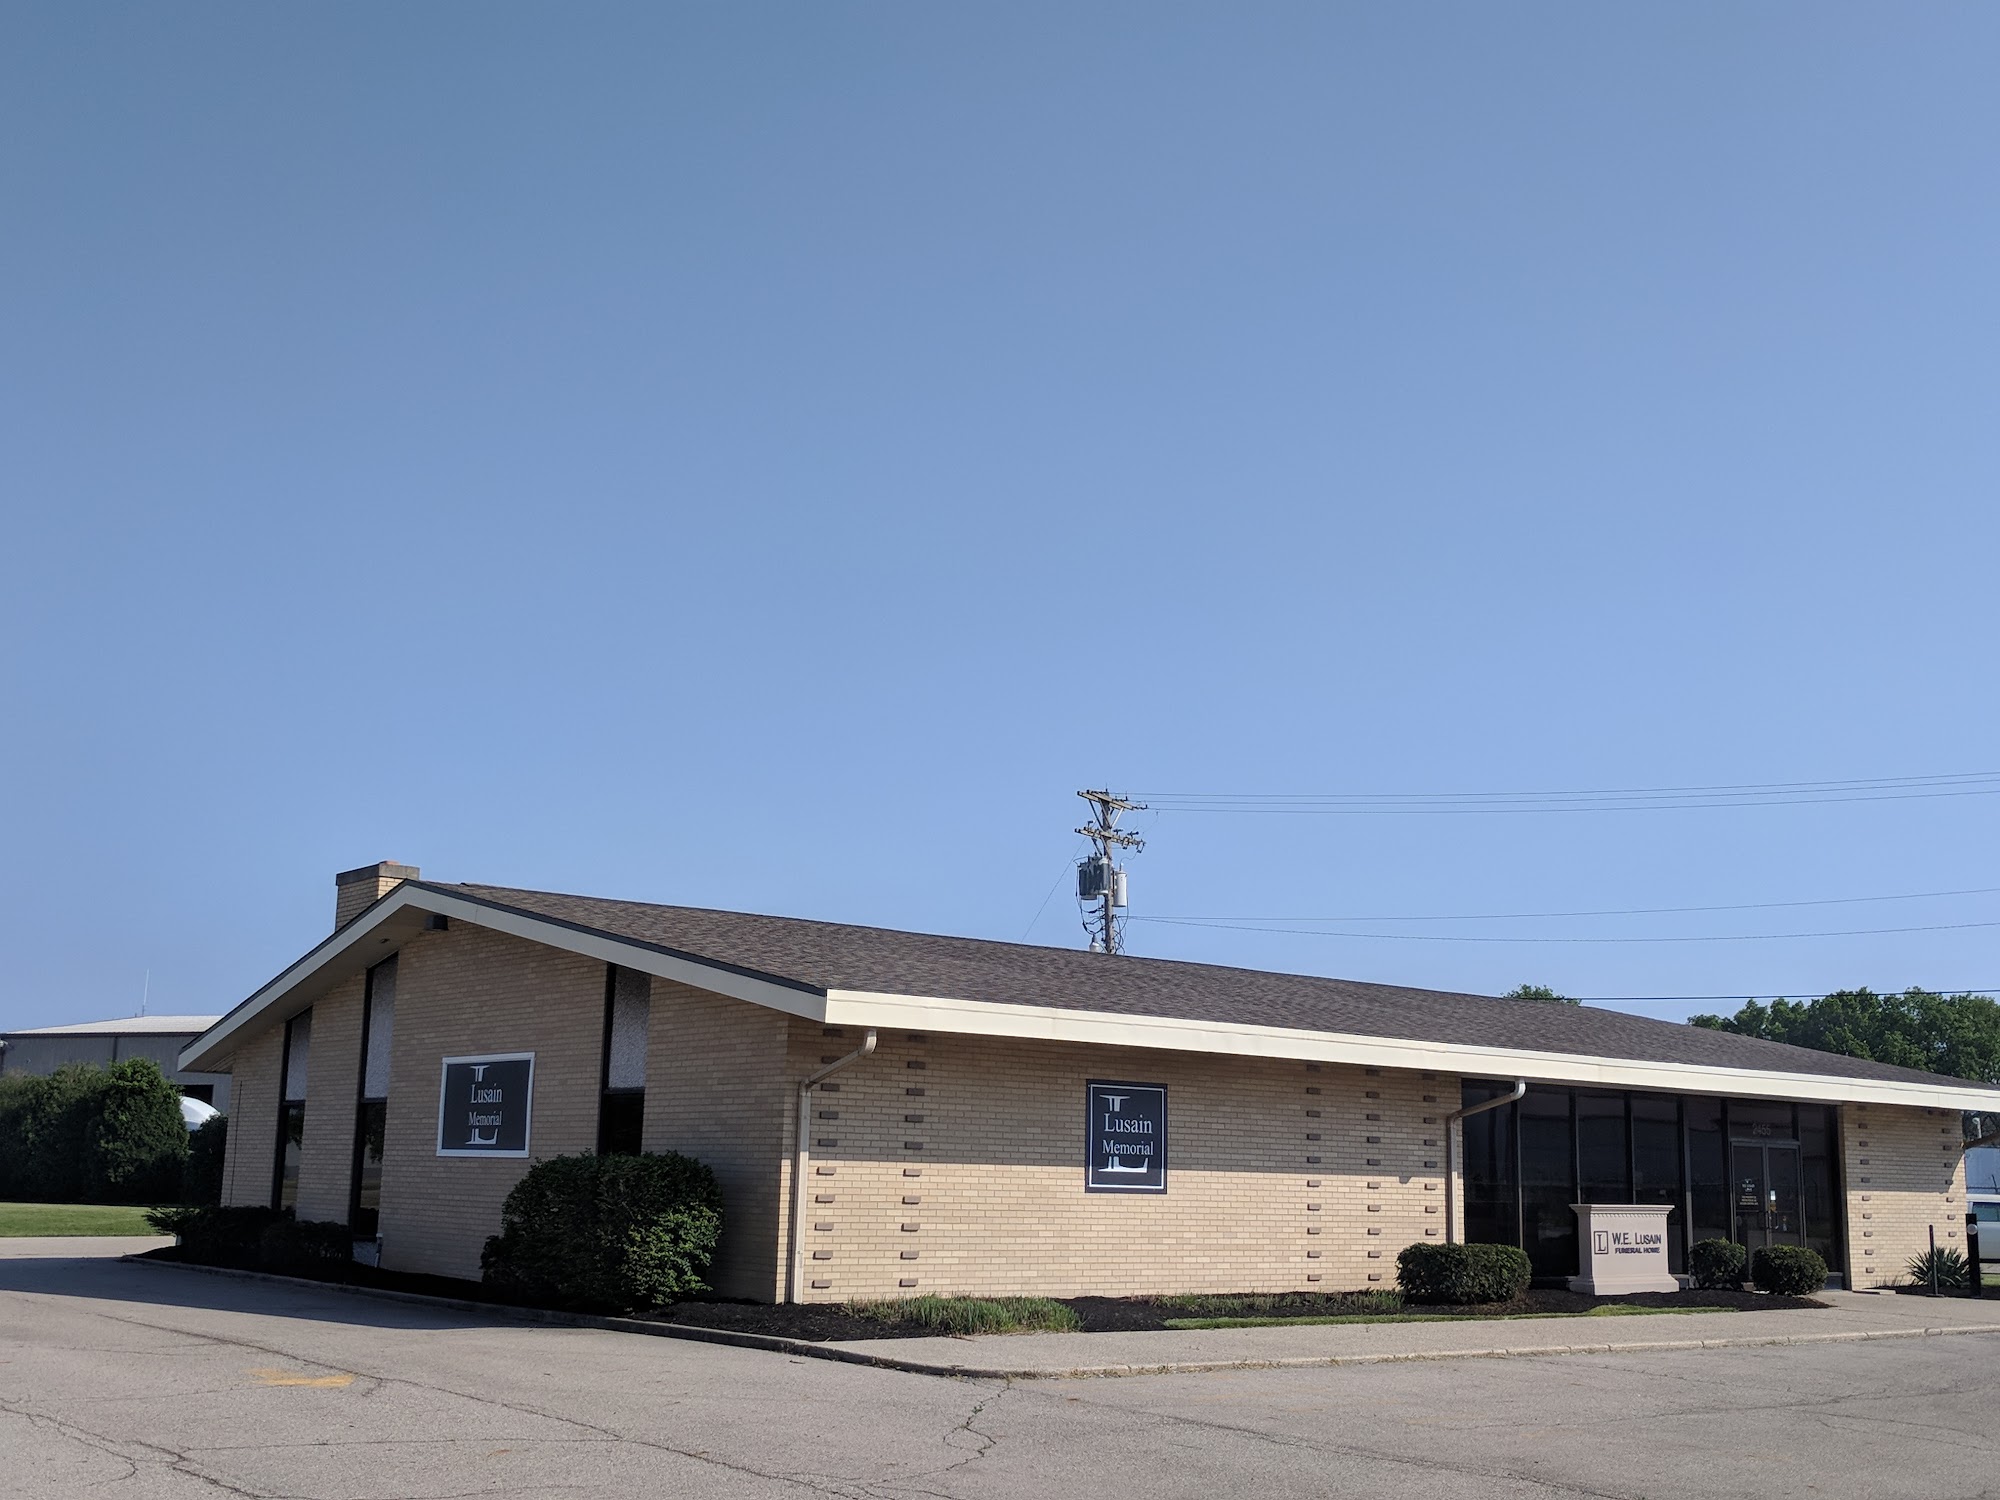 W.E. Lusain Funeral Home and Crematory